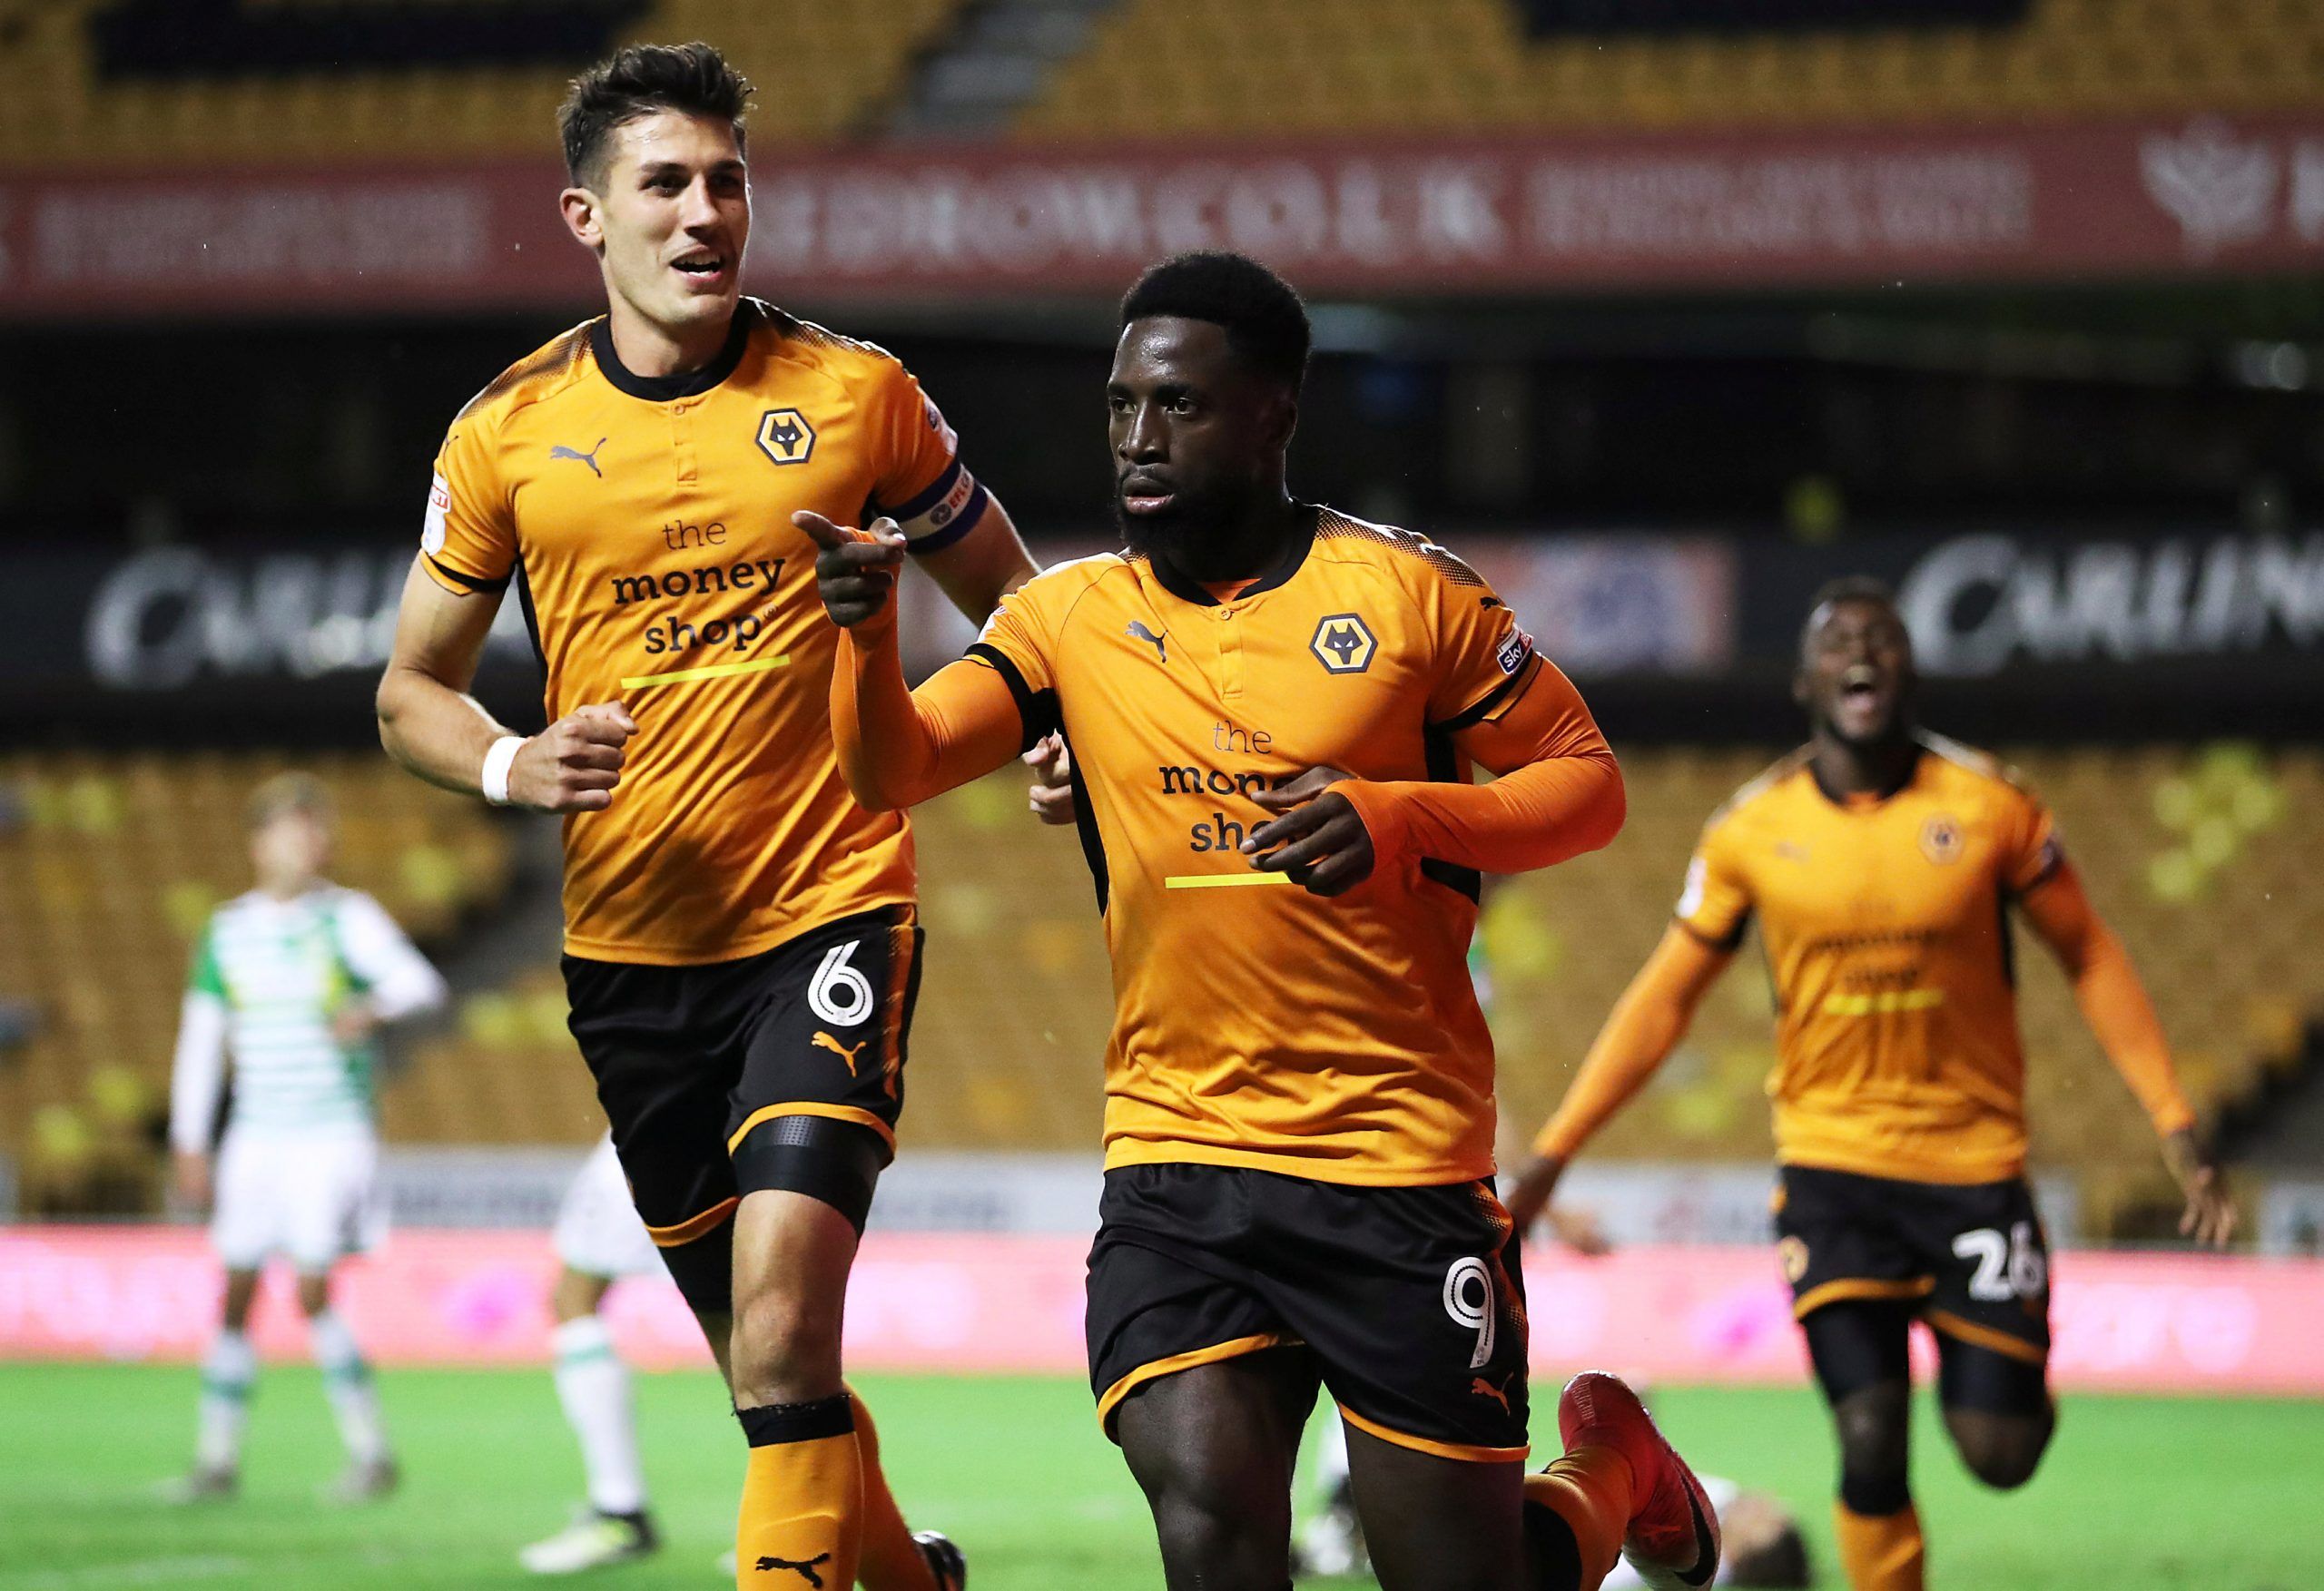 Soccer Football - Carabao Cup First Round - Wolverhampton Wanderers vs Yeovil Town - Wolverhampton, Britain - August 8, 2017   Wolverhampton Wanderers’ Nouha Dicko celebrates scoring their first goal   Action Images/John Clifton